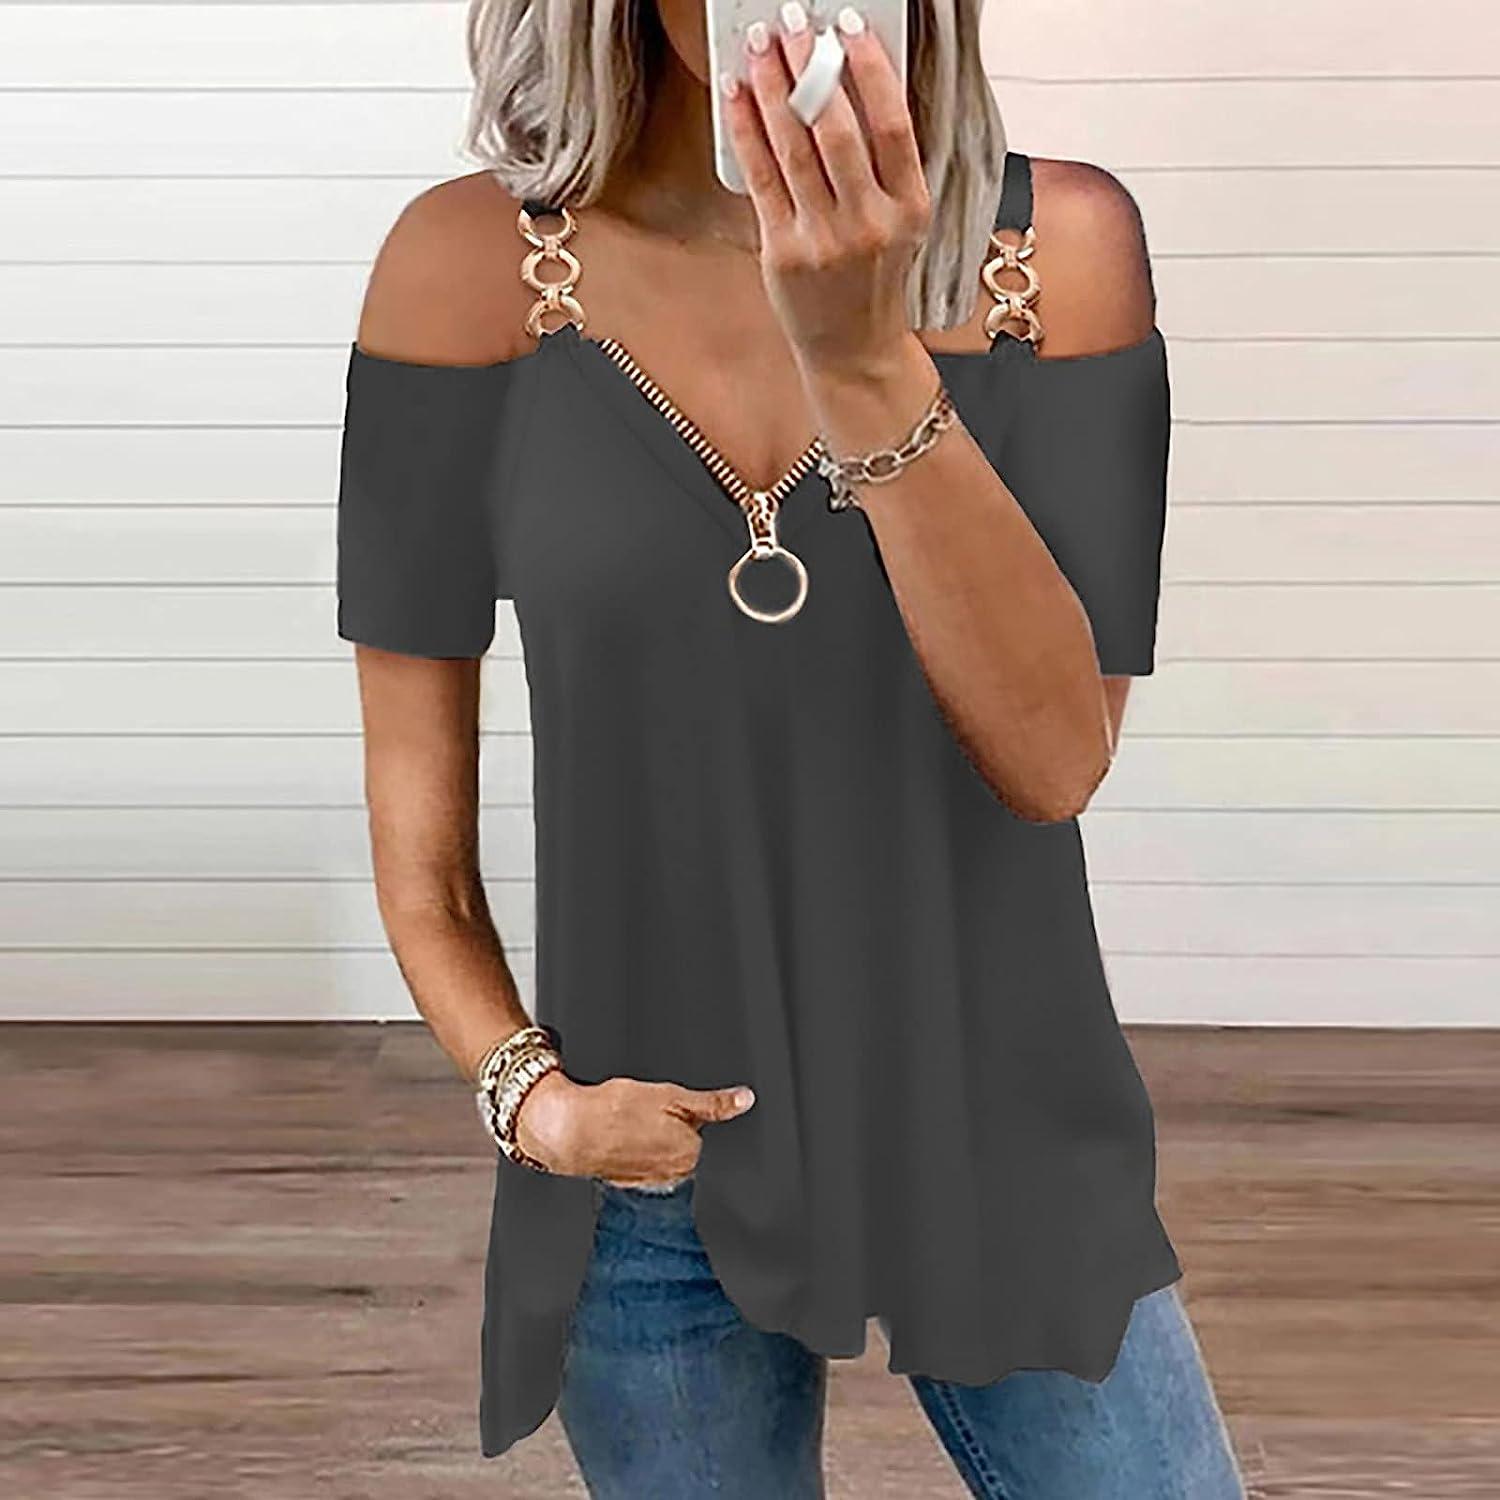 Women's Plus Size Tops Dressy Casual Tunics Blouses Lace Summer Cold  Shoulder Shirts Short Sleeve